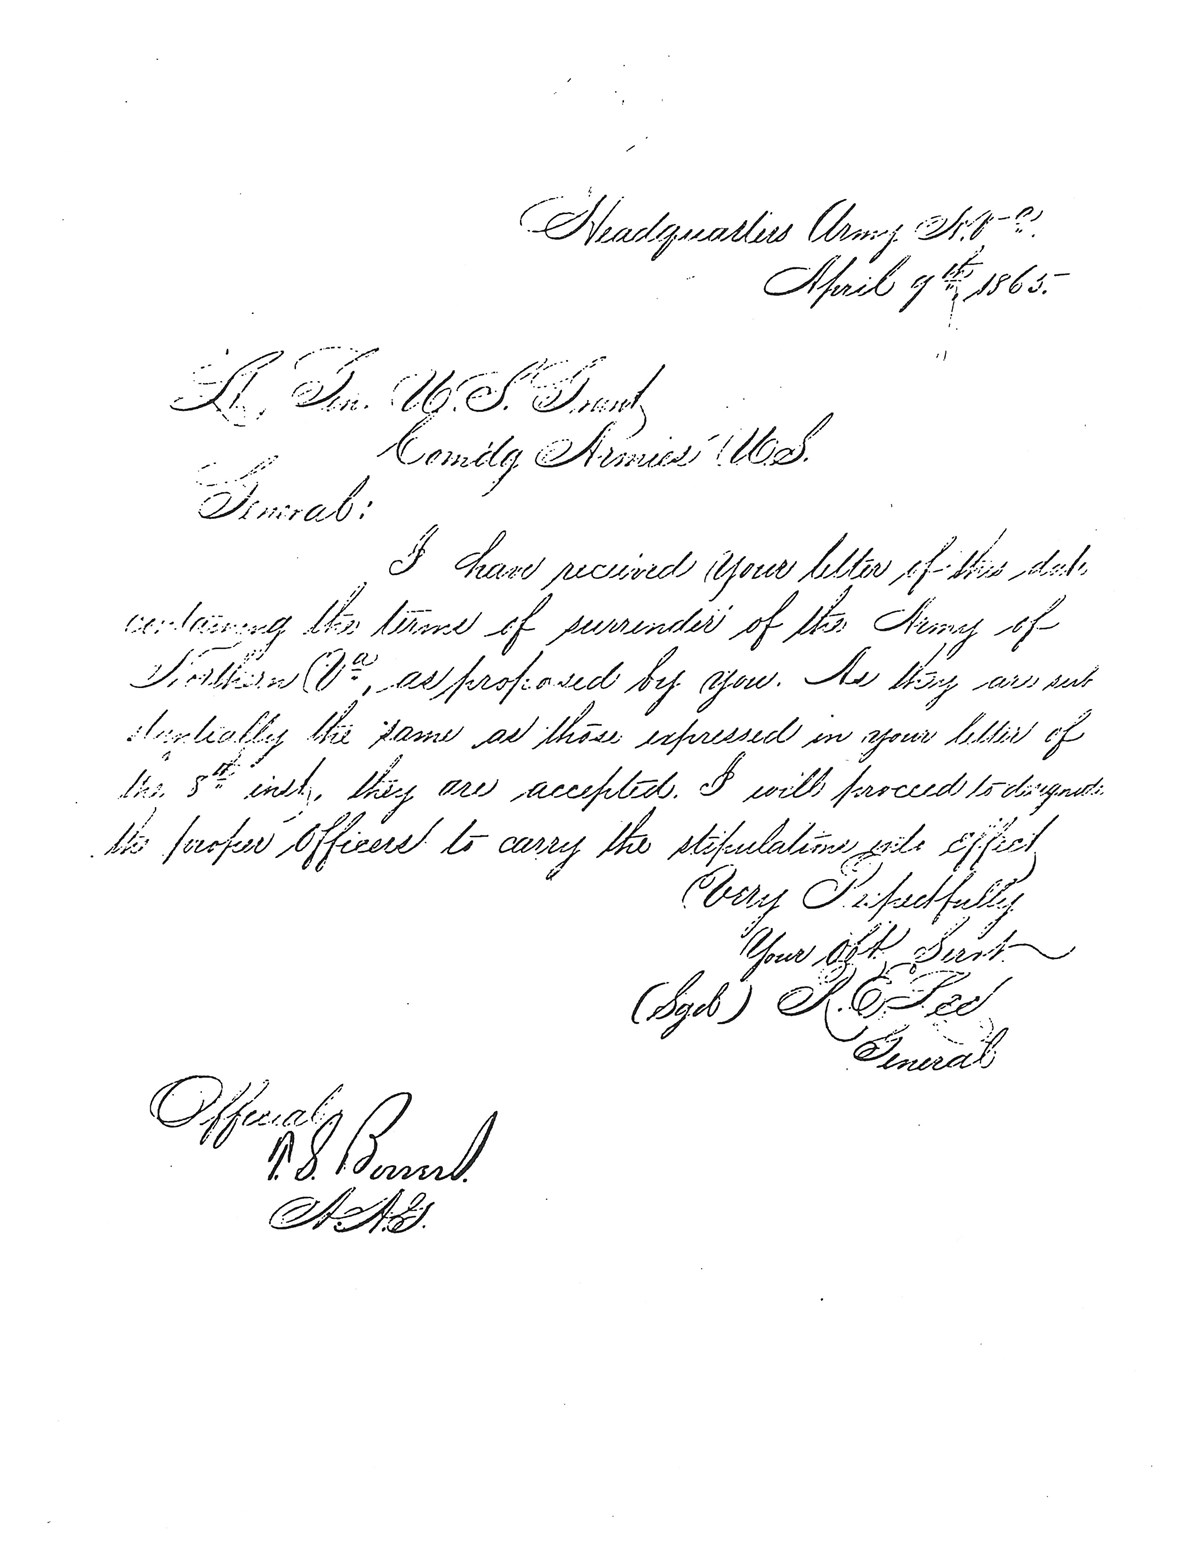 Copy of a copy of Lee's handwritten letter of acceptance